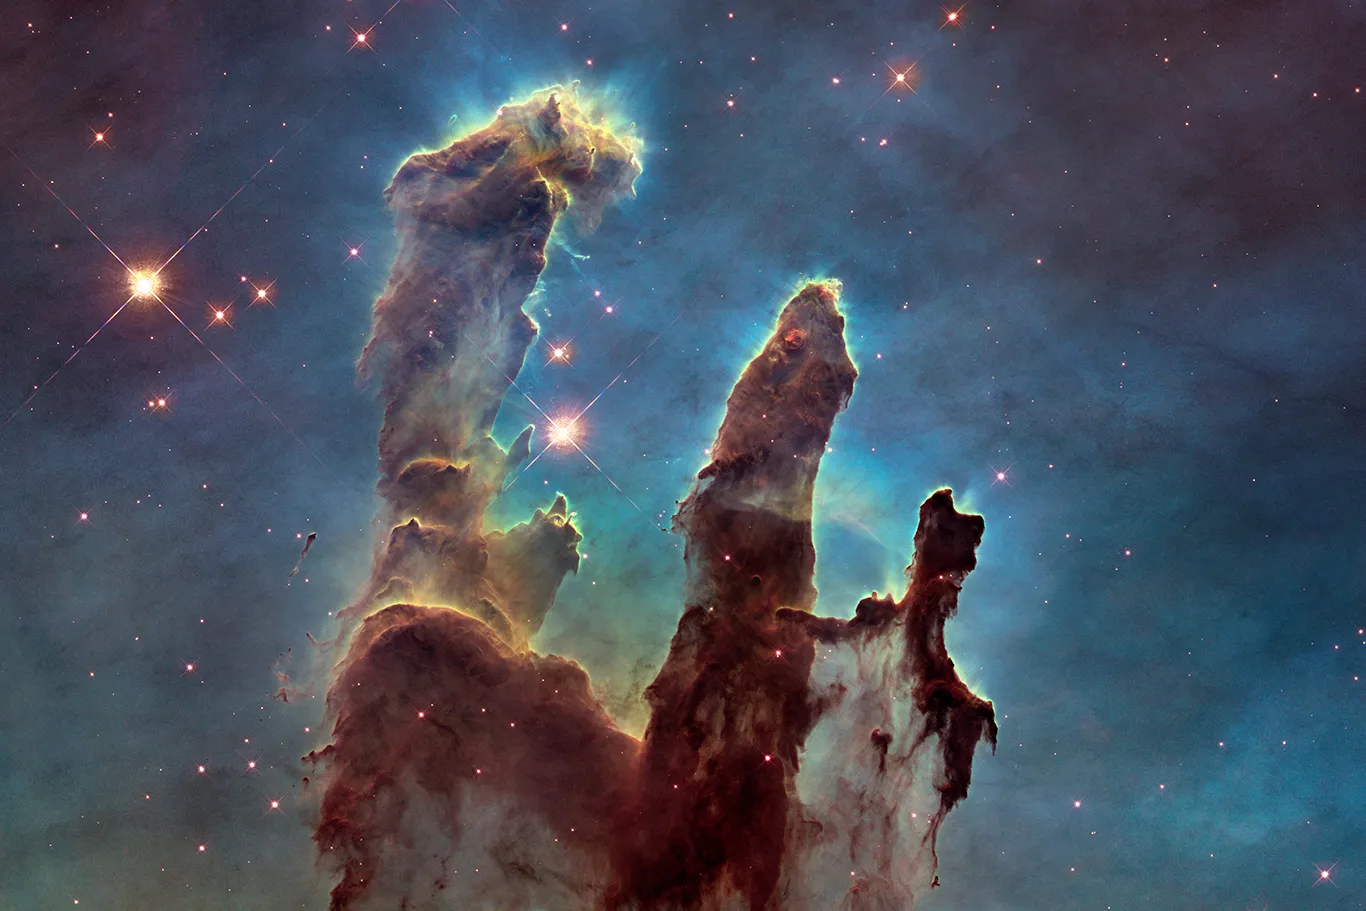 The Pillars of Creation, captured by the Hubble Space Telescope.?w=200&h=150